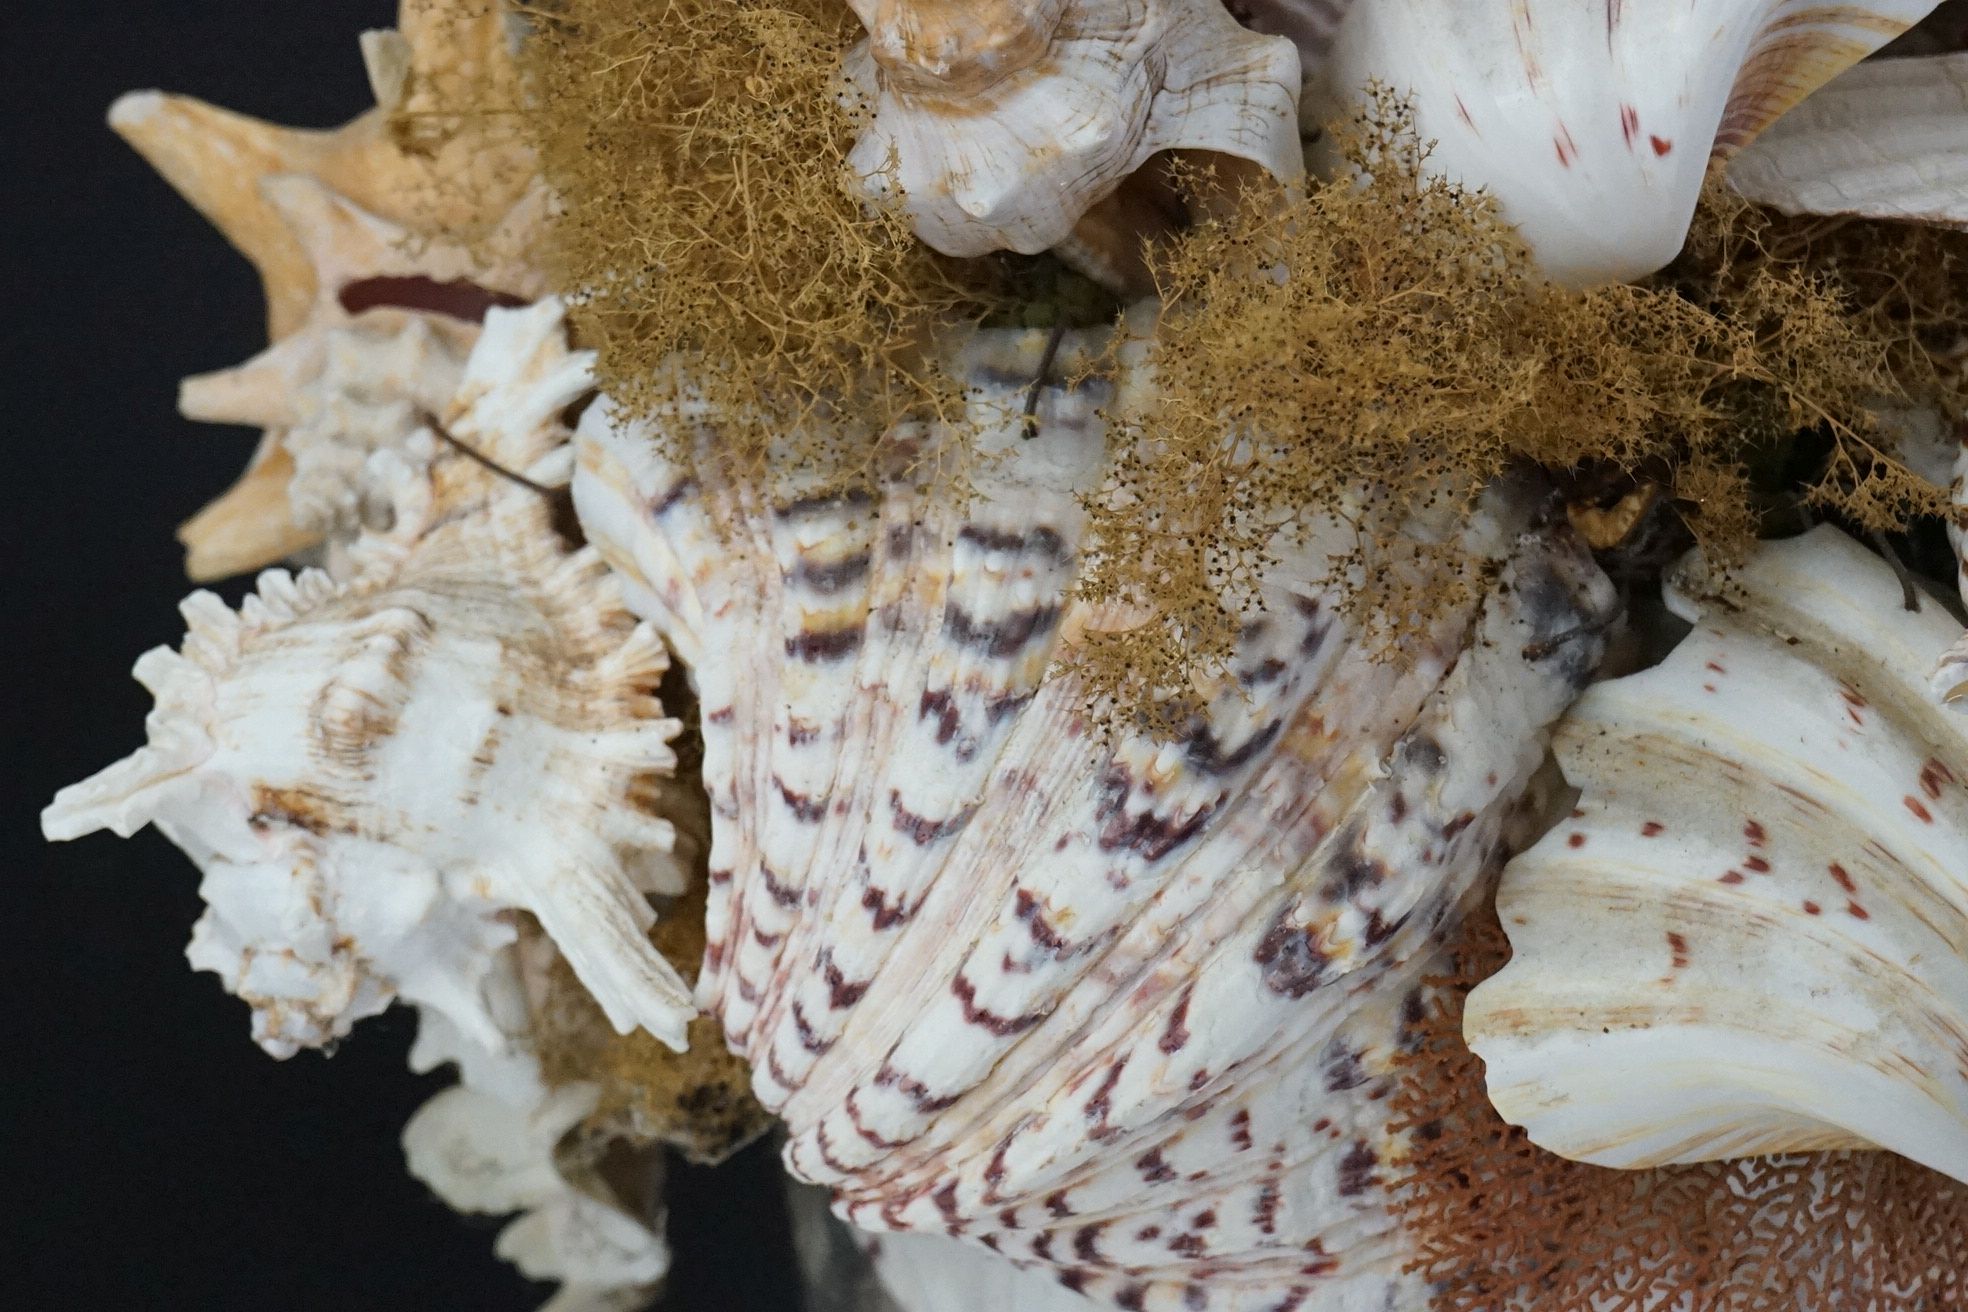 Table centrepiece presentation of sea shells to include conch shells, starfish, seaweed, paua - Image 7 of 10